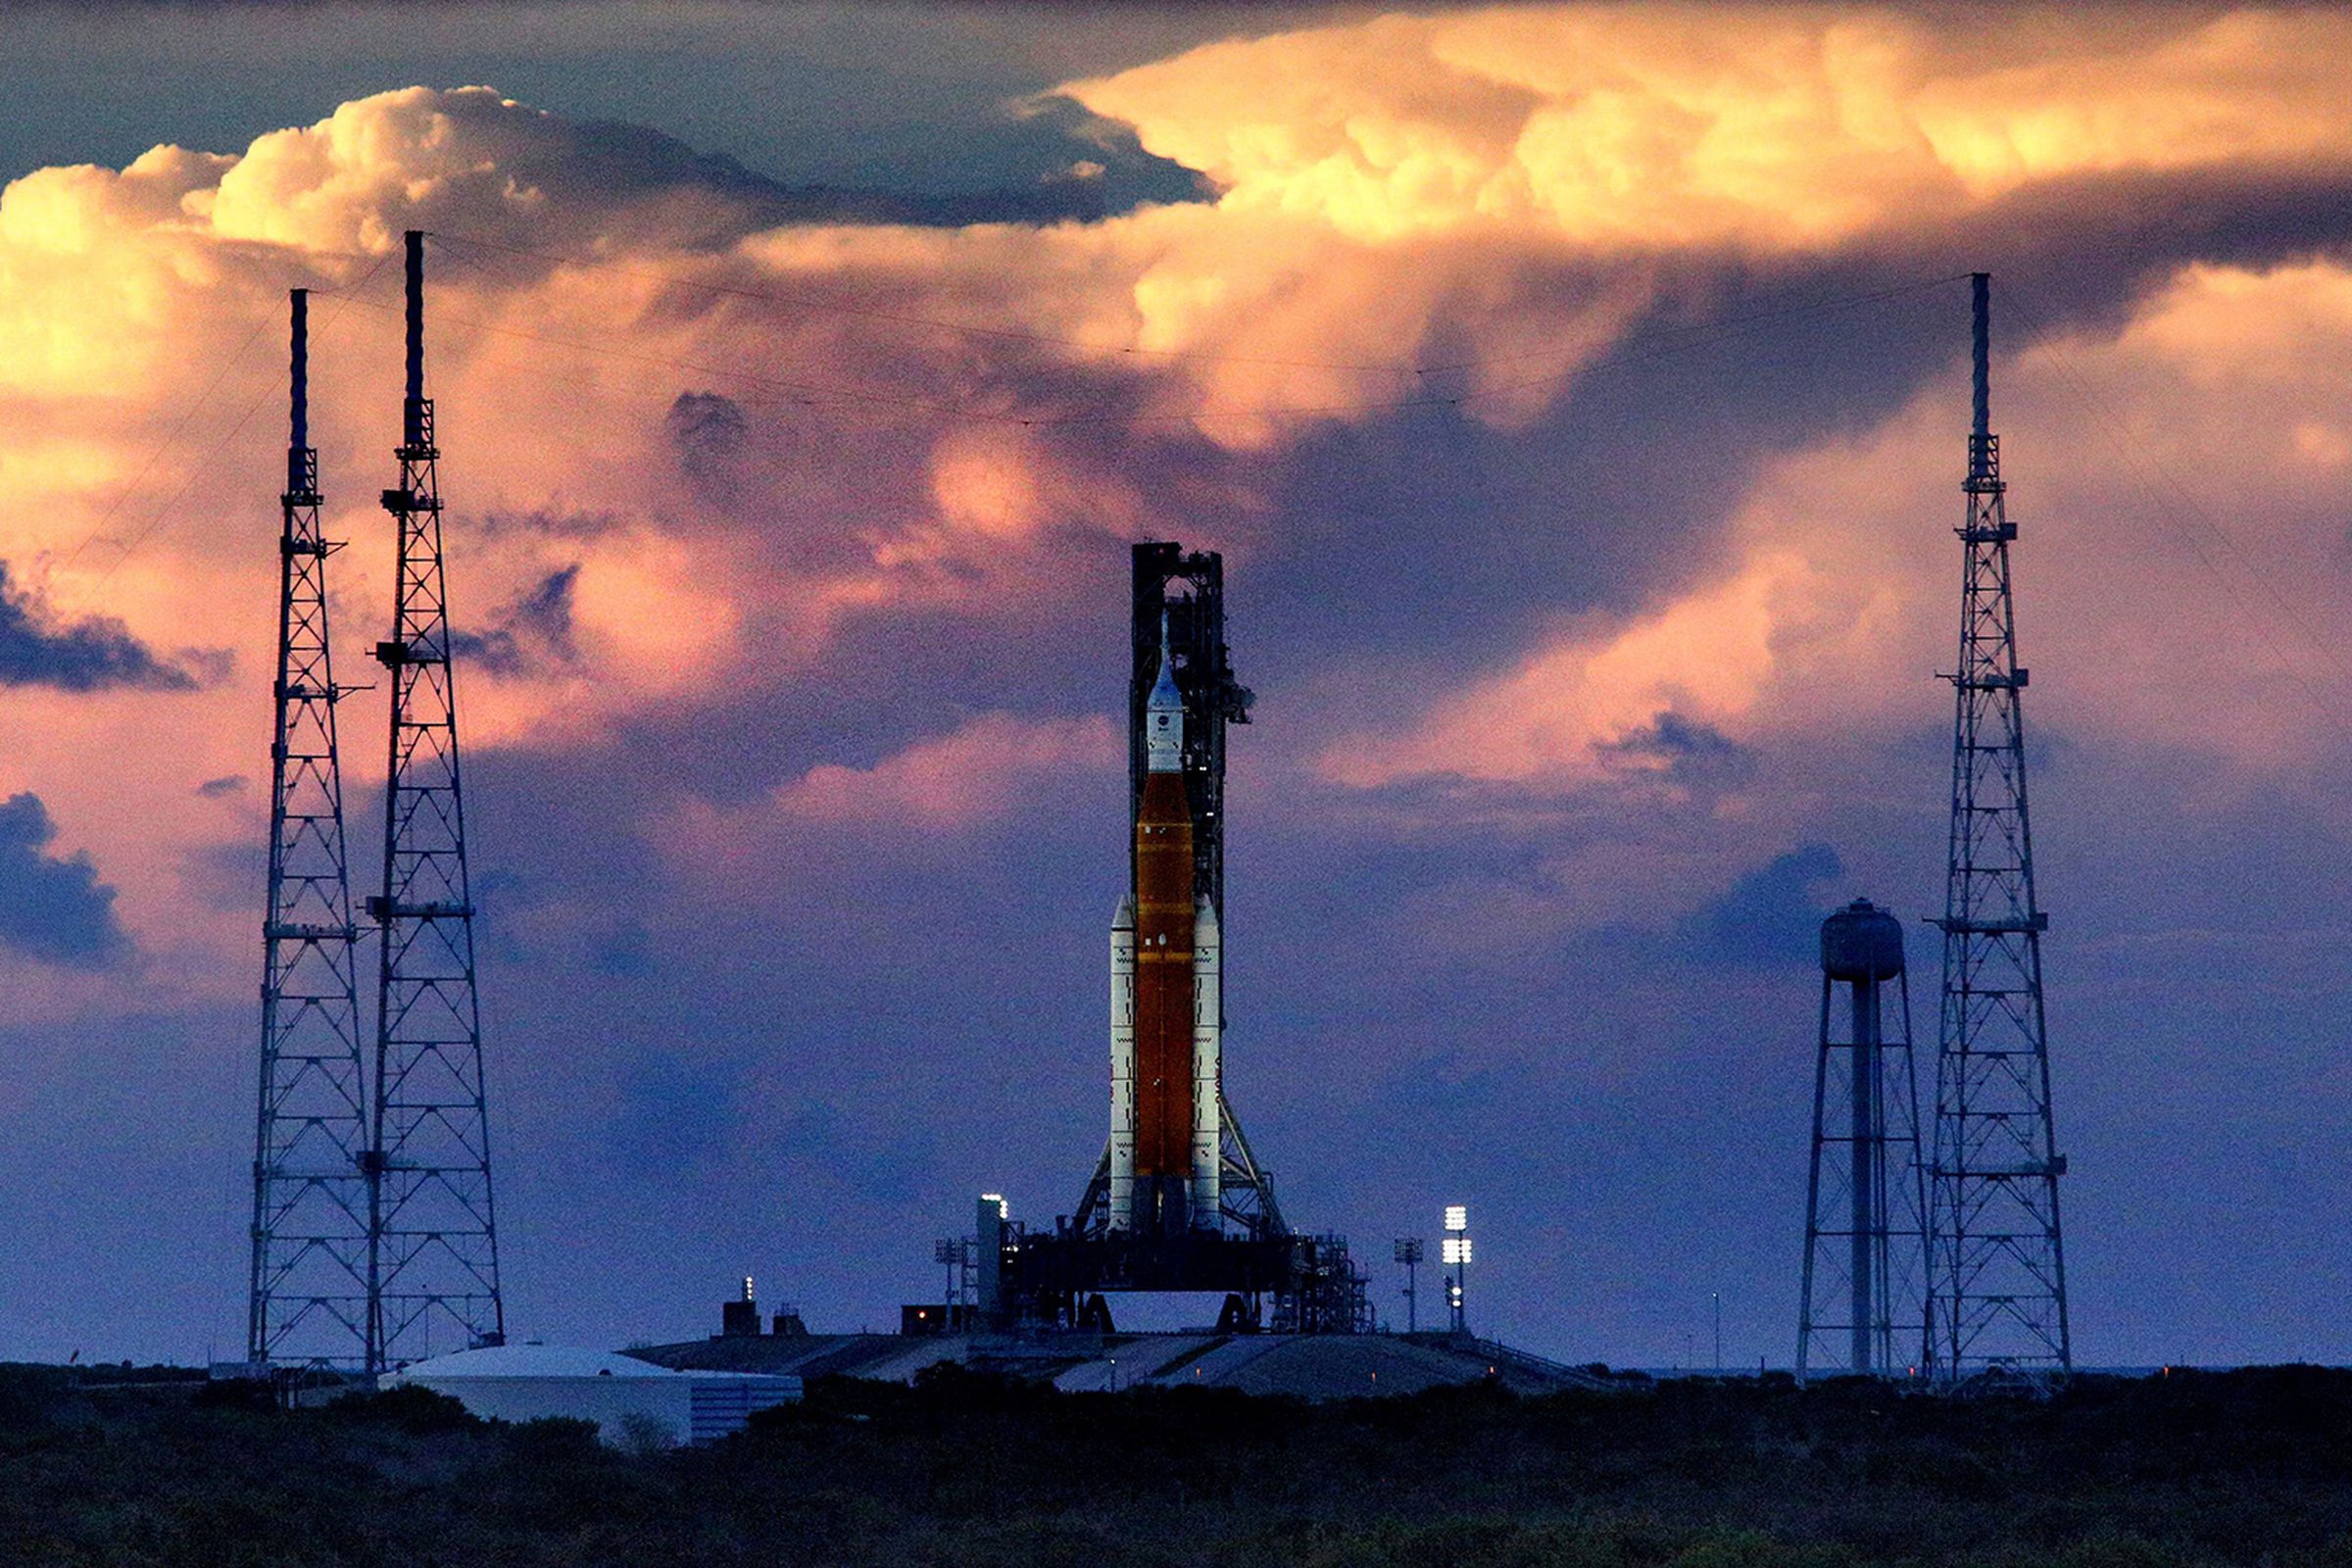 A rocket sits on the launchpad at the center of the image with sunset-lit clouds looming in the background